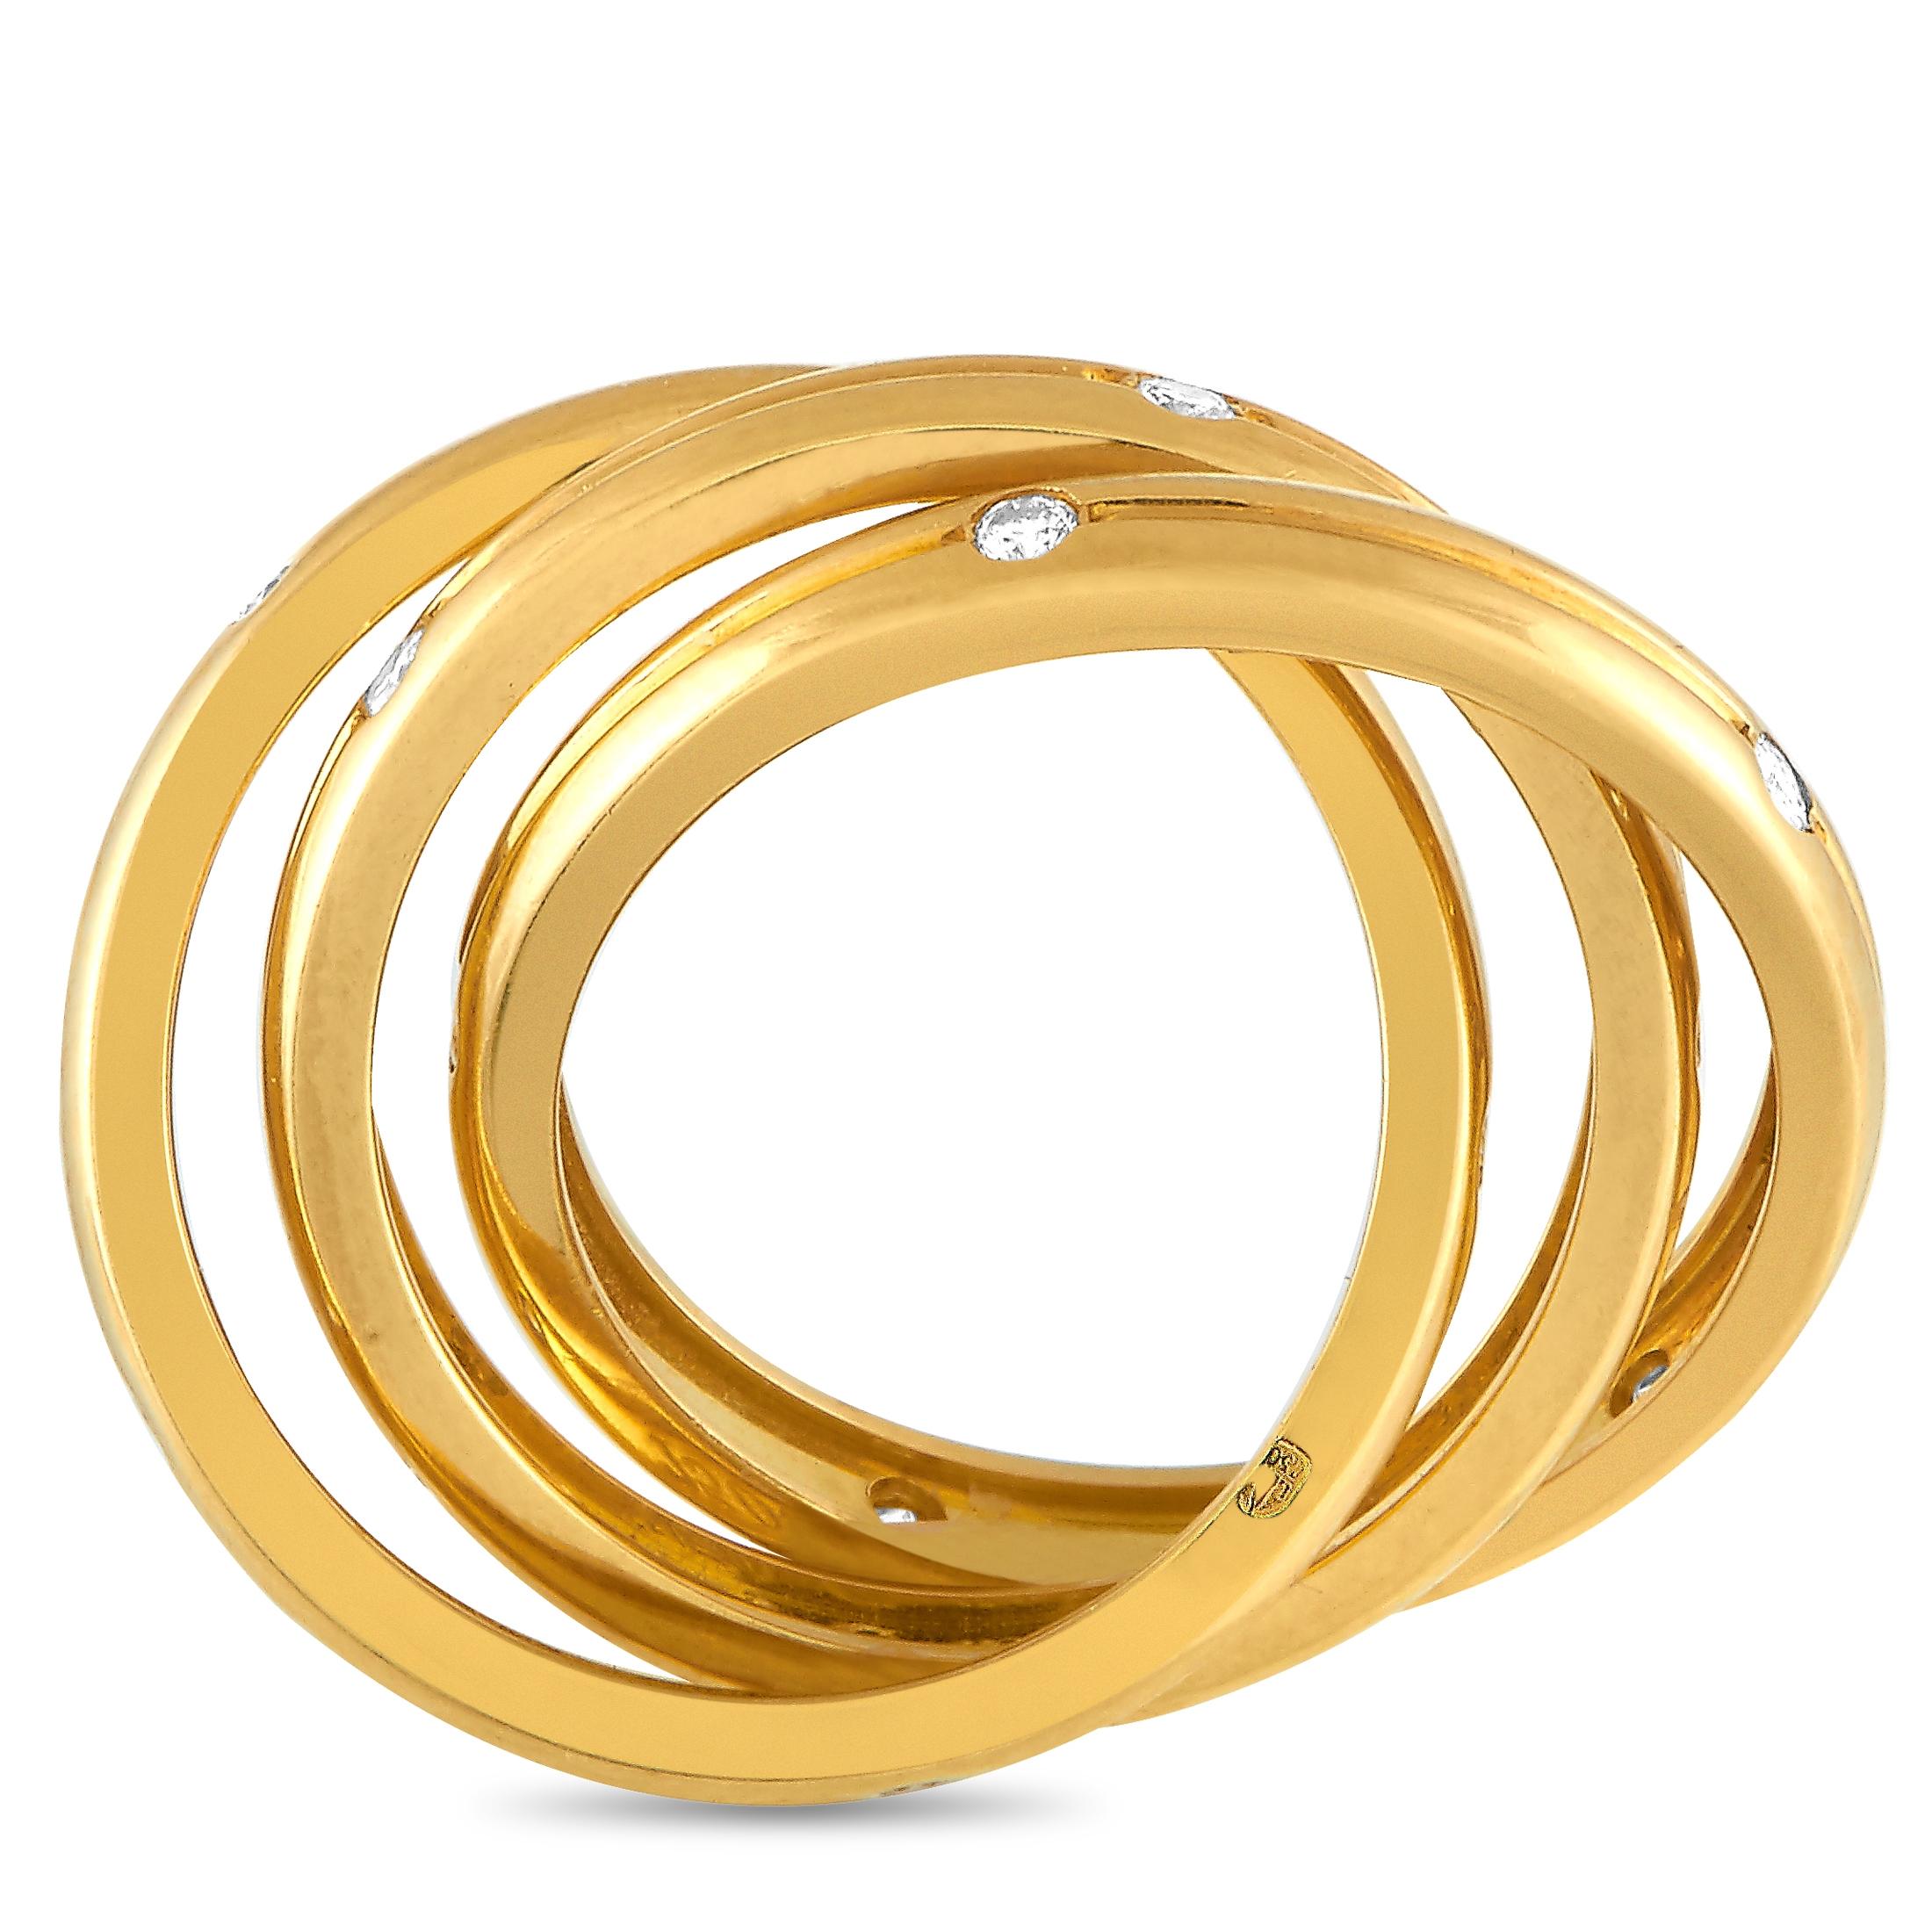 The Cartier “Trinity” ring is made of 18K yellow gold and embellished with diamonds. The ring weighs 9.6 grams and boasts band thickness of 7 mm and top height of 2 mm, while top dimensions measure 7 by 23 mm.
 
 This jewelry piece is offered in